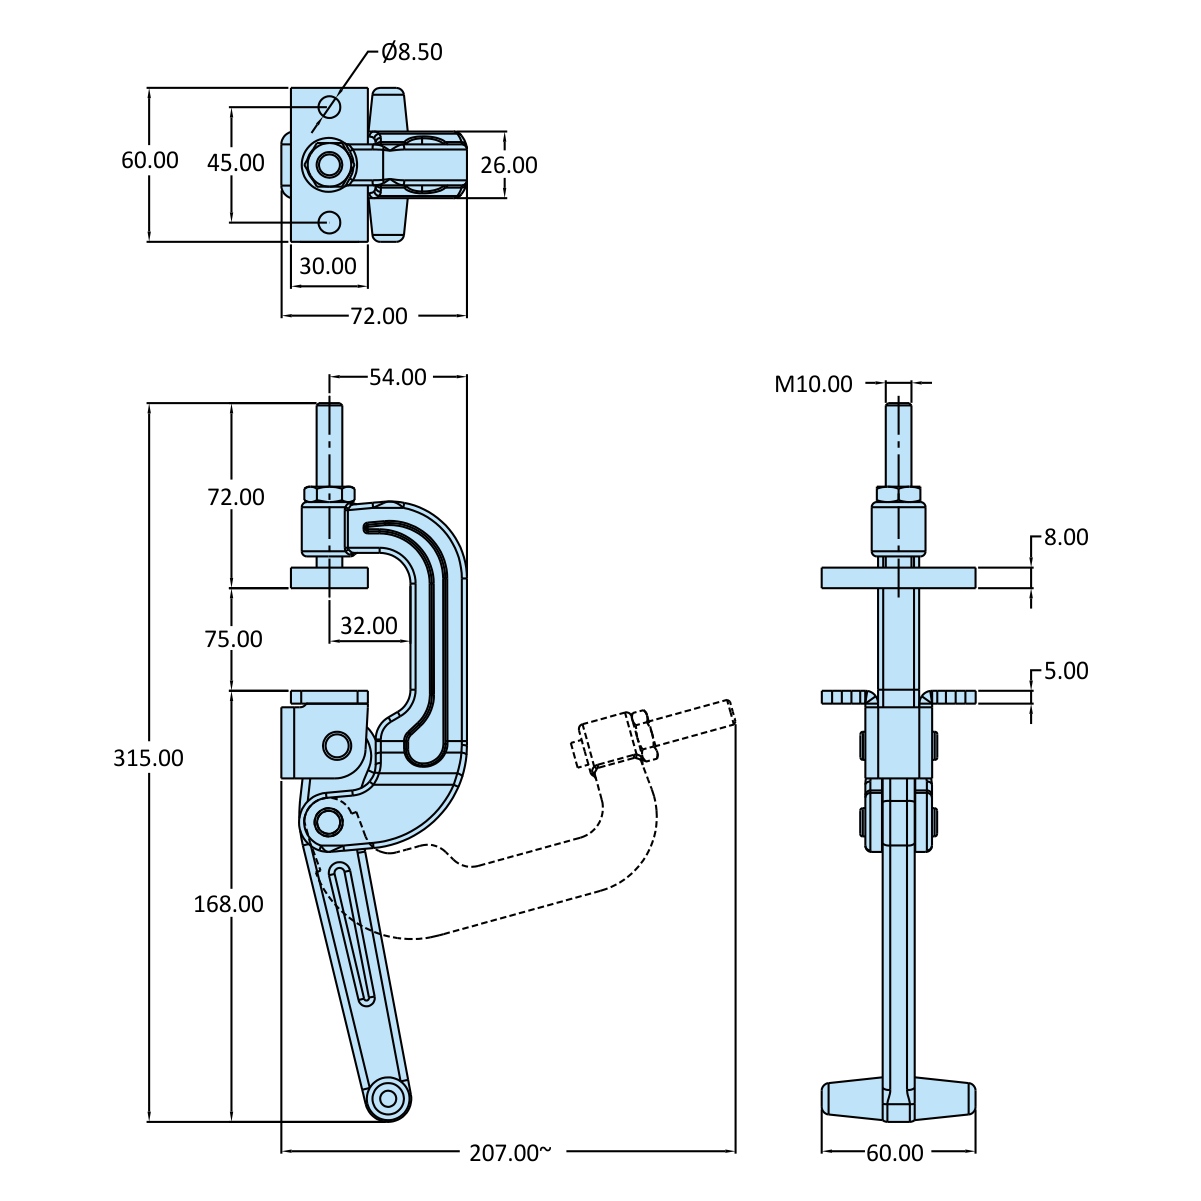 c clamp drawing - Steelsmith